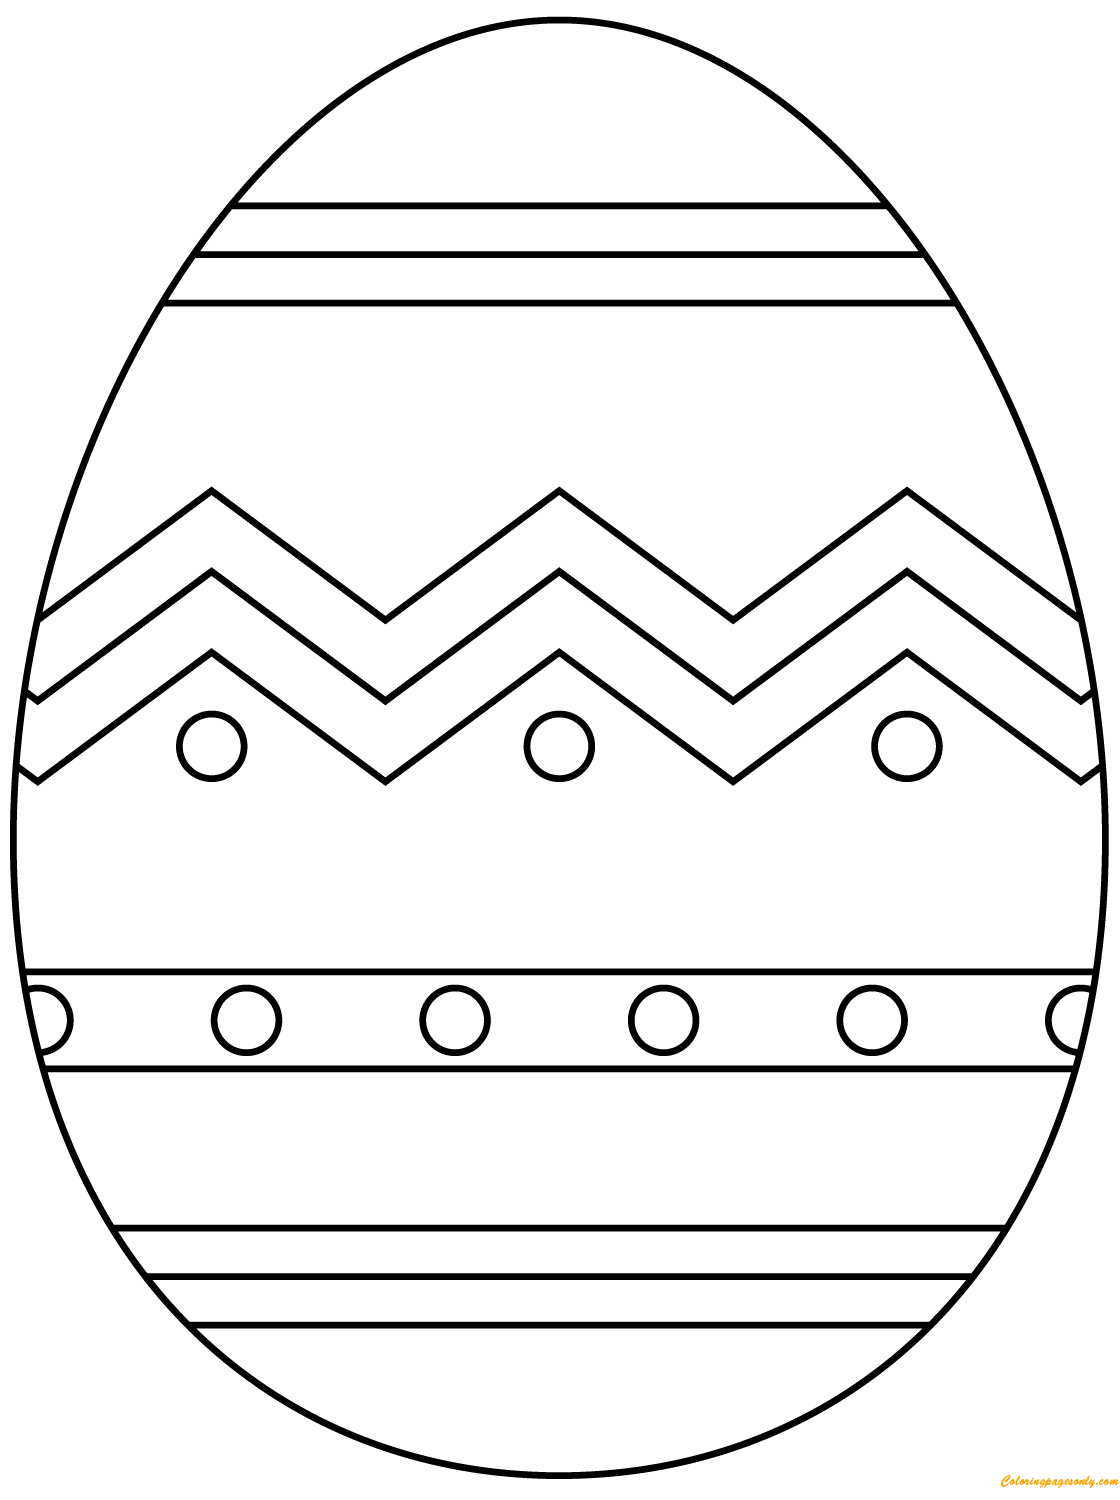 Abstract Pattern Easter Egg Coloring Page